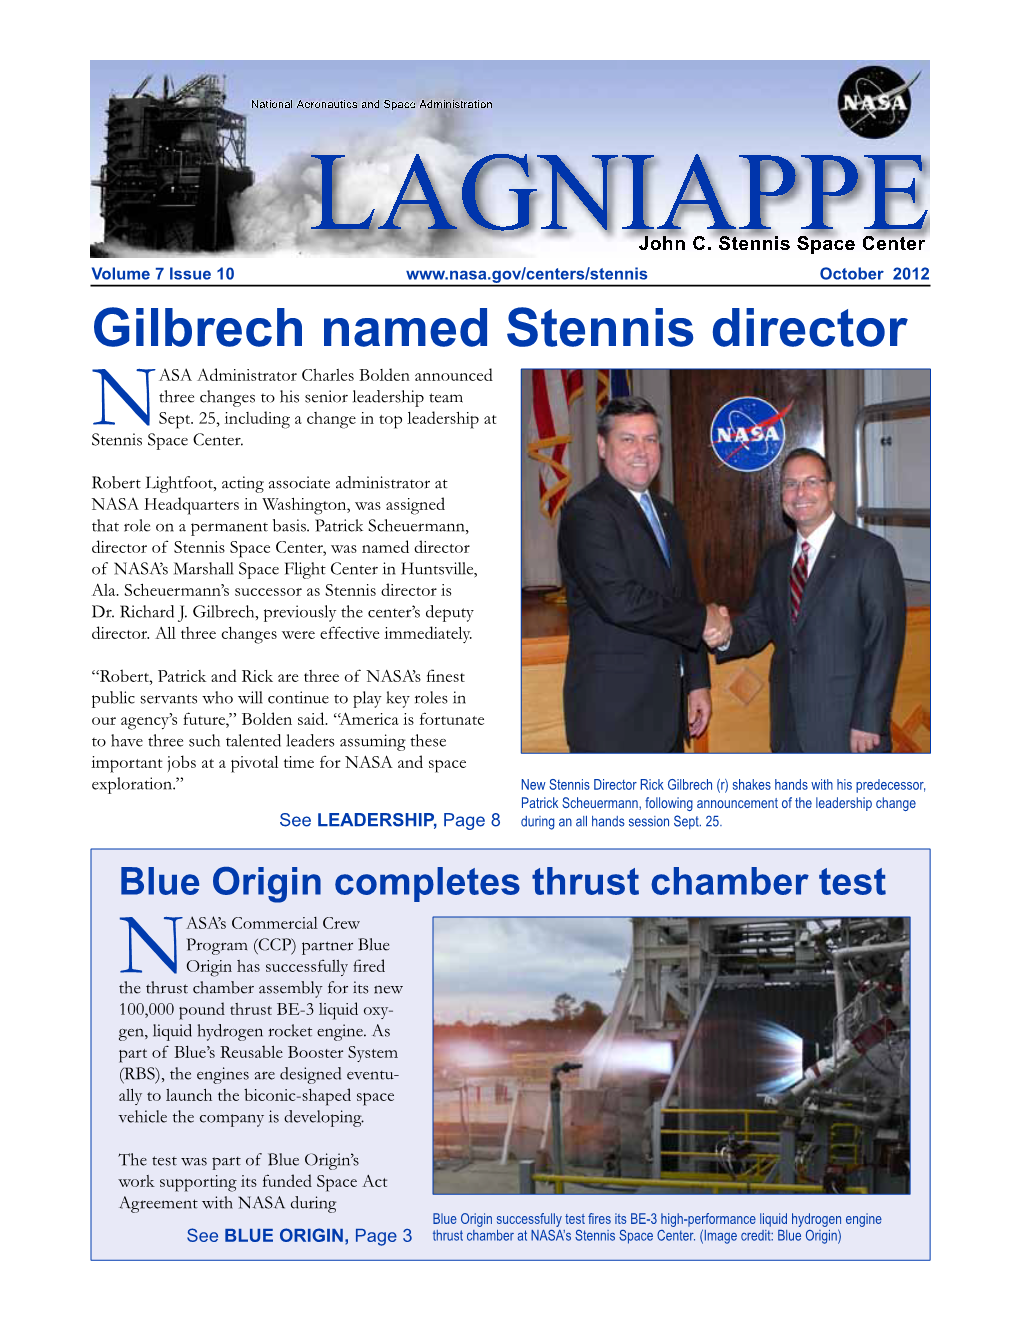 Gilbrech Named Stennis Director ASA Administrator Charles Bolden Announced Three Changes to His Senior Leadership Team Nsept